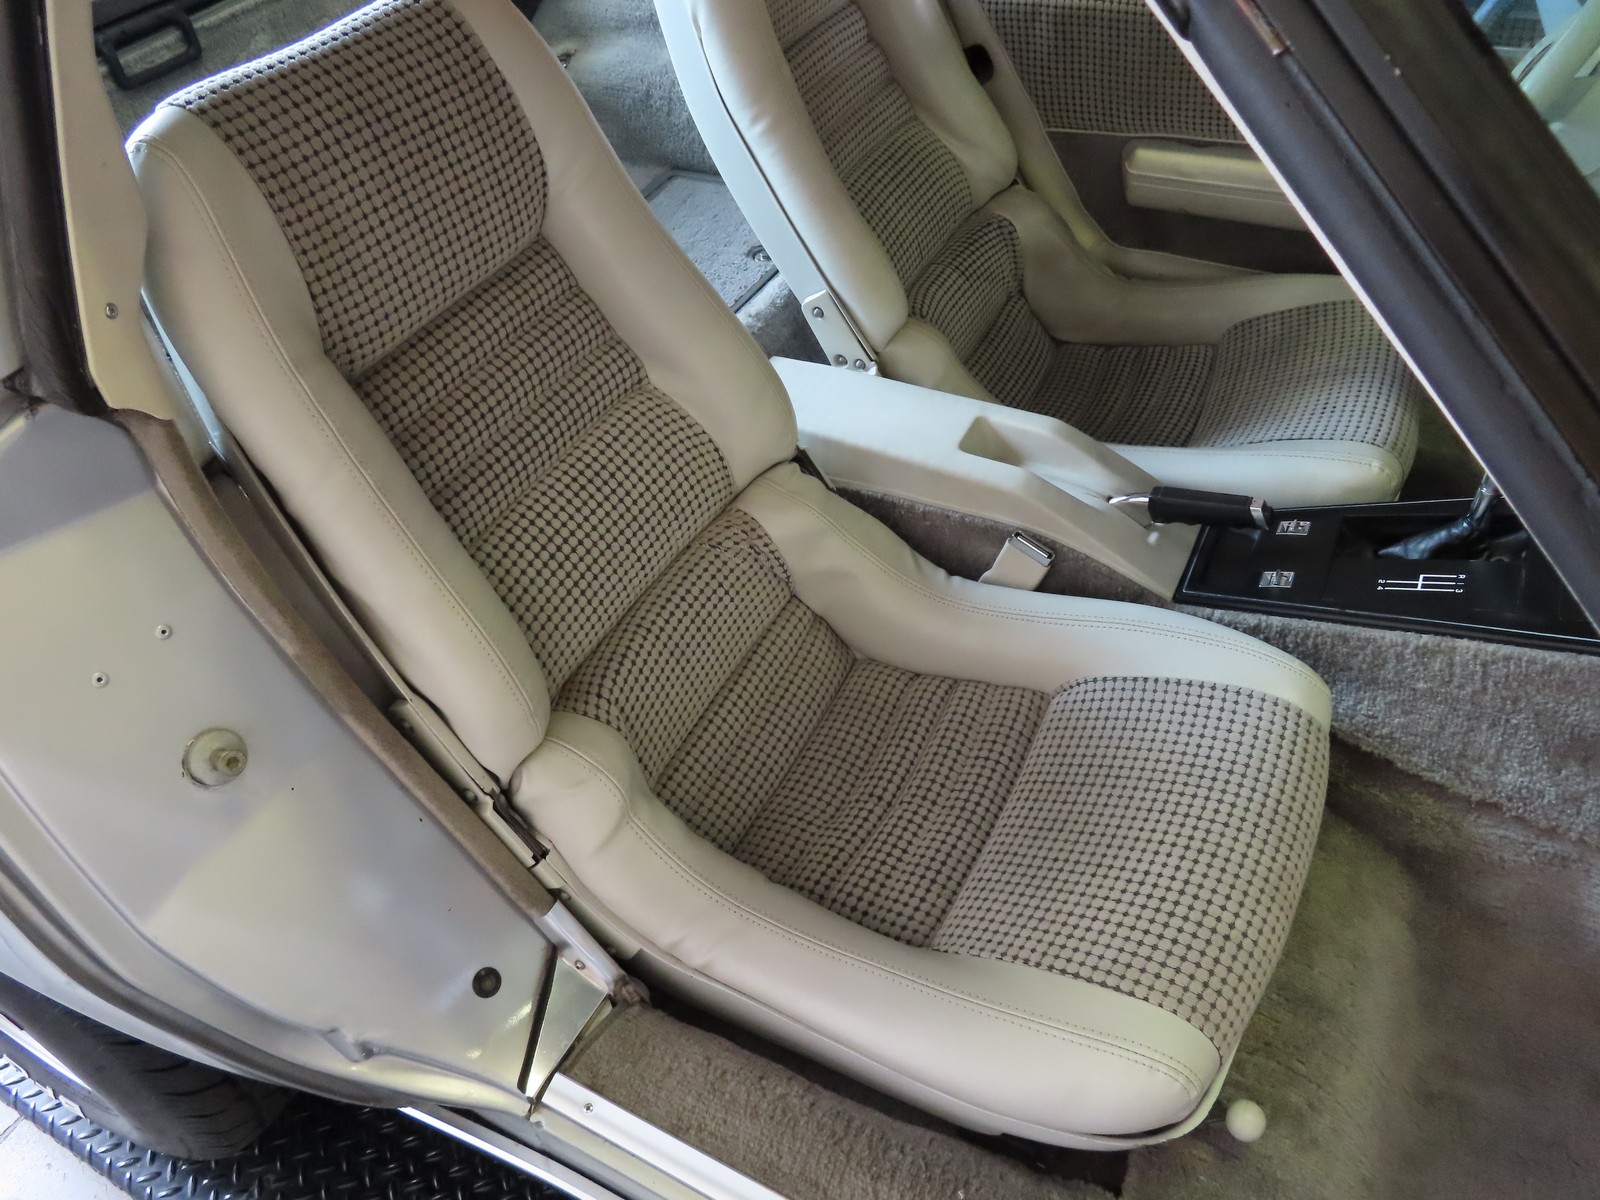 1979 Corvette in Silver with Oyster Interior